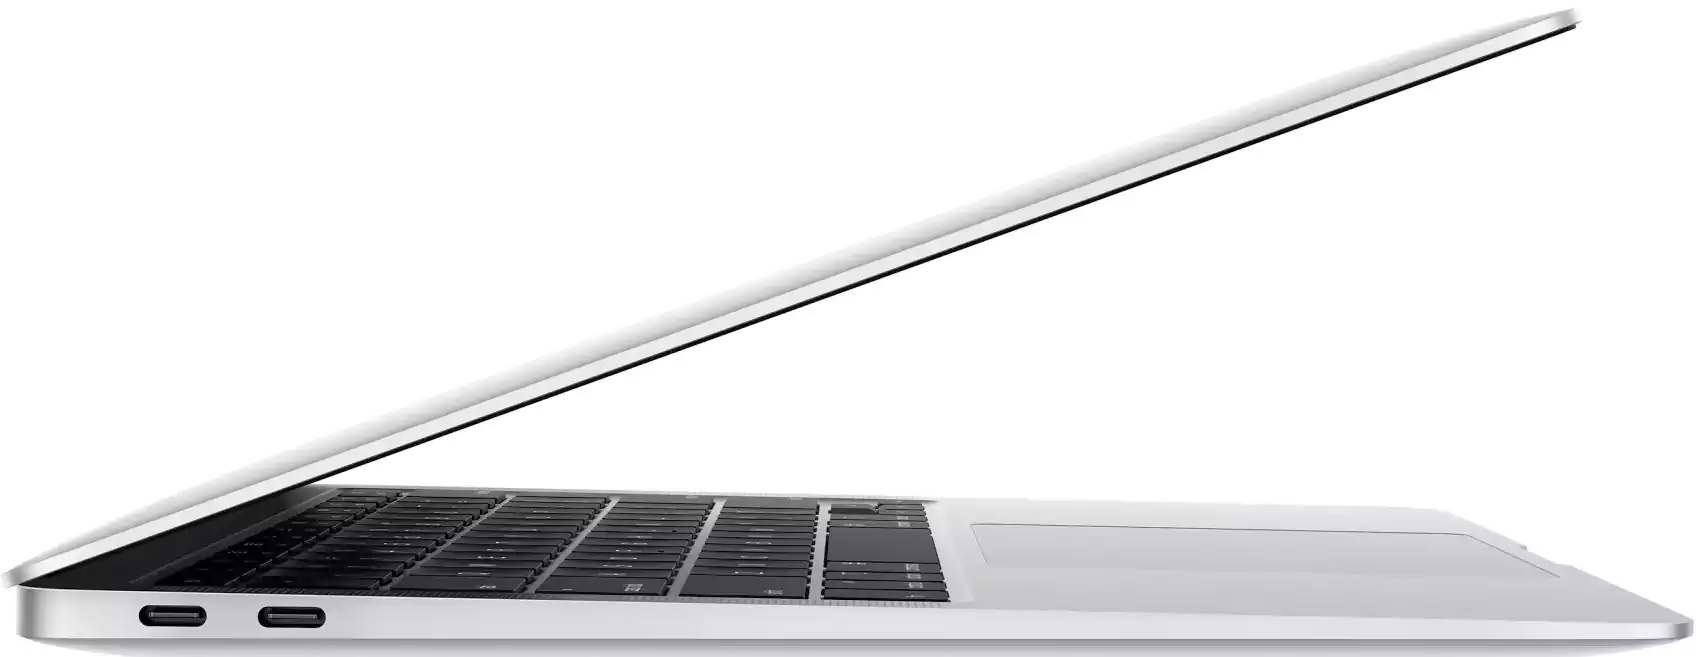 Apple MacBook Air 13 Laptop, Apple M1 chip with 8-core CPU and 7-core GPU, 8GB RAM, 256GB SSD, 13 Inch Display, Space Gray